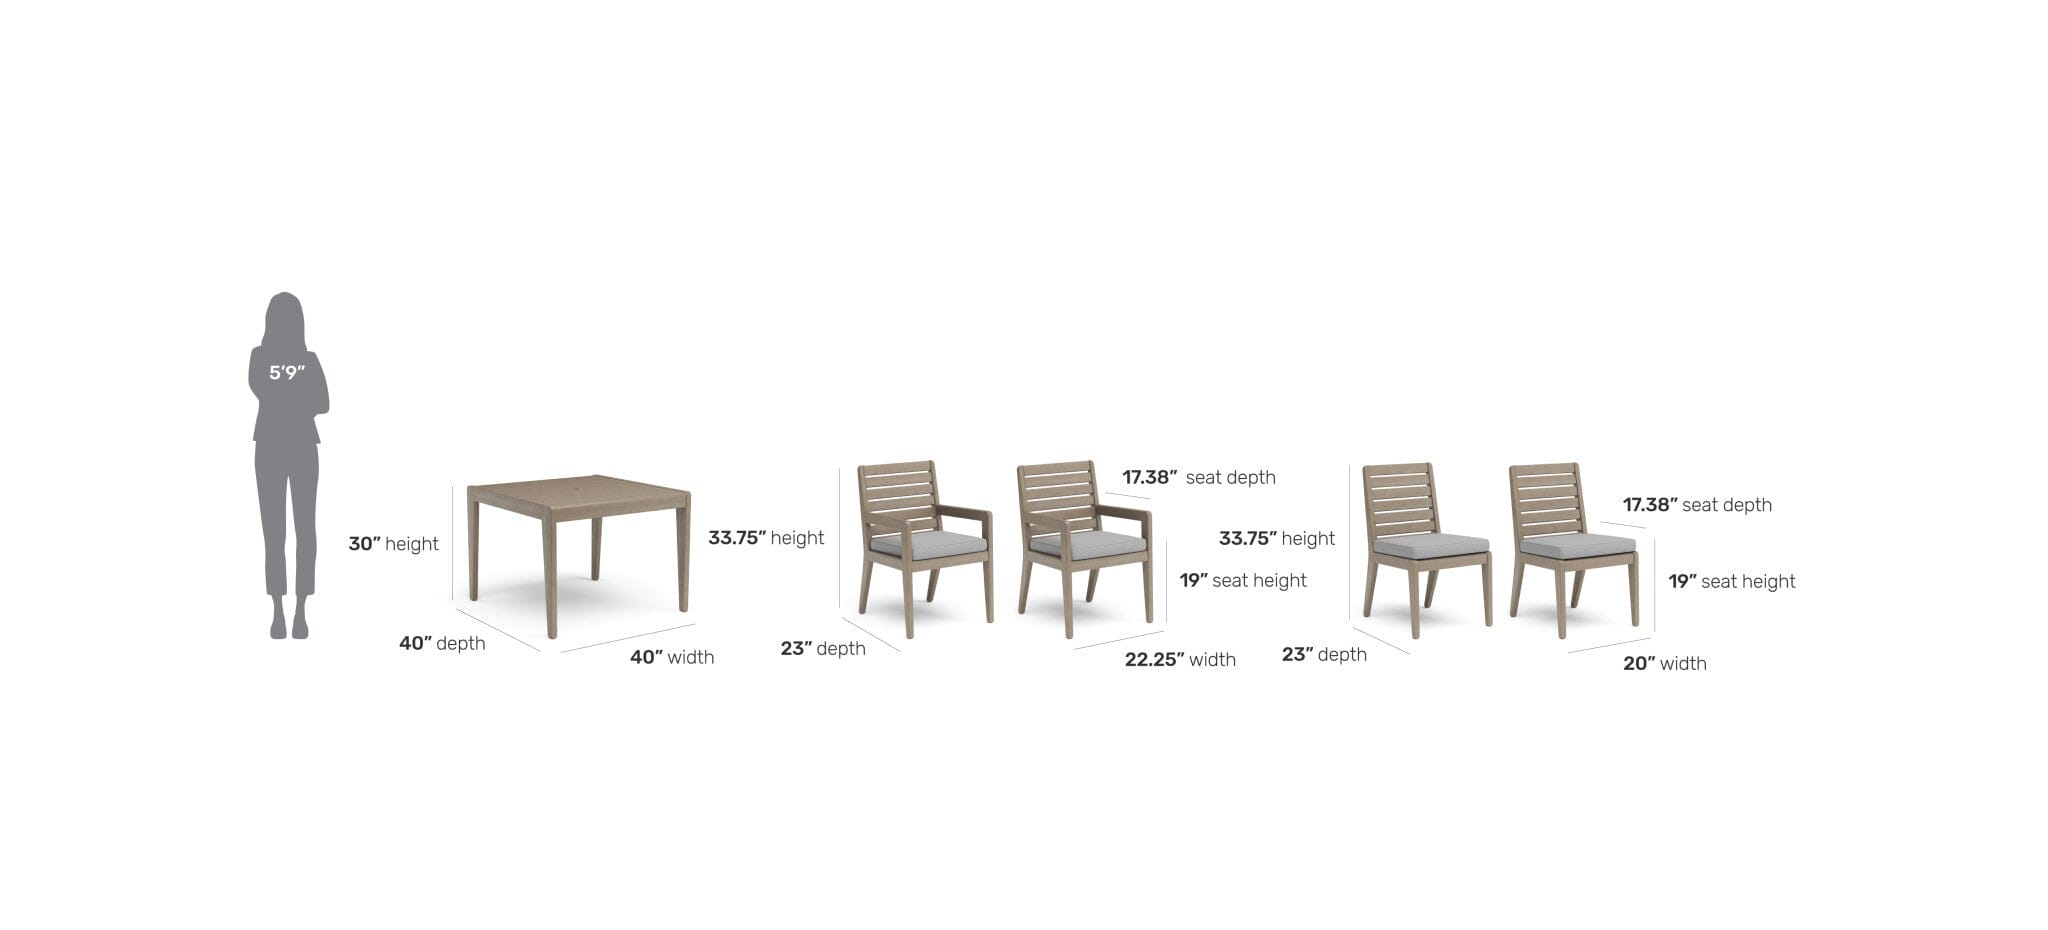 Transitional Outdoor Dining Table and Four Chairs By Sustain Outdoor Dining Set Sustain